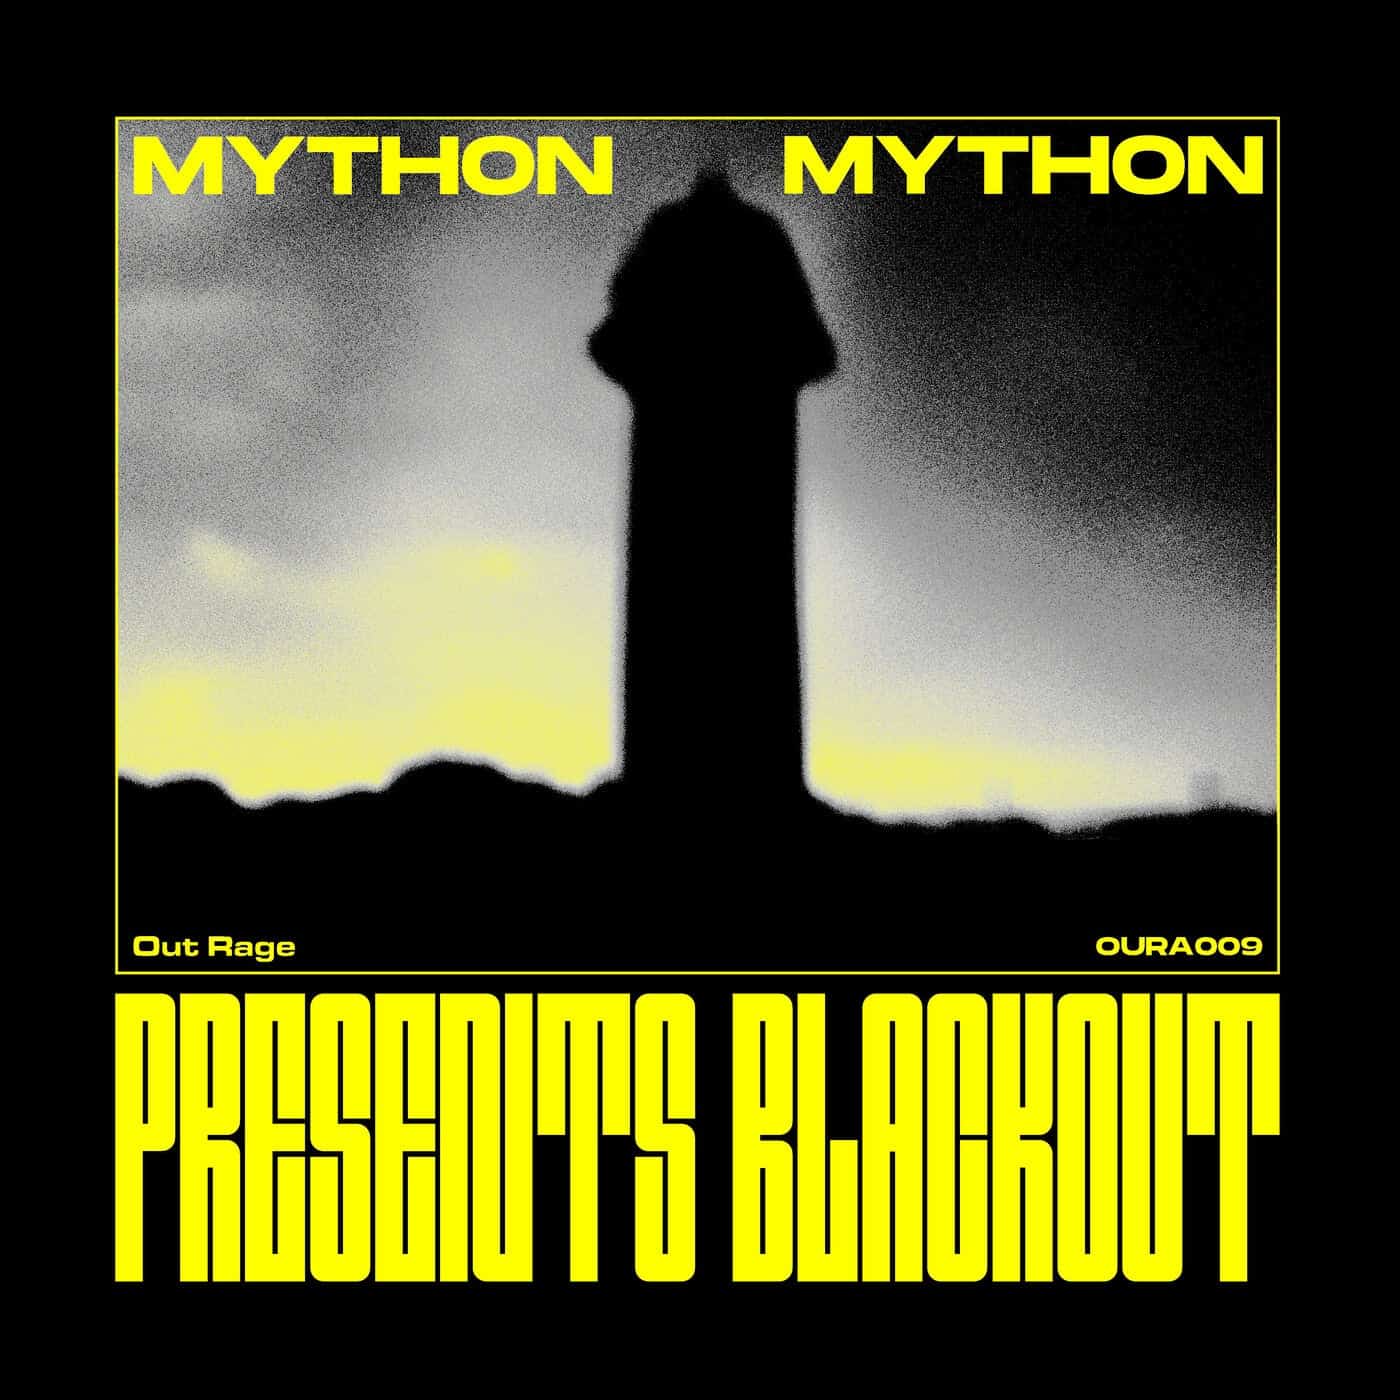 image cover: Mython - Presents Blackout / OURA009